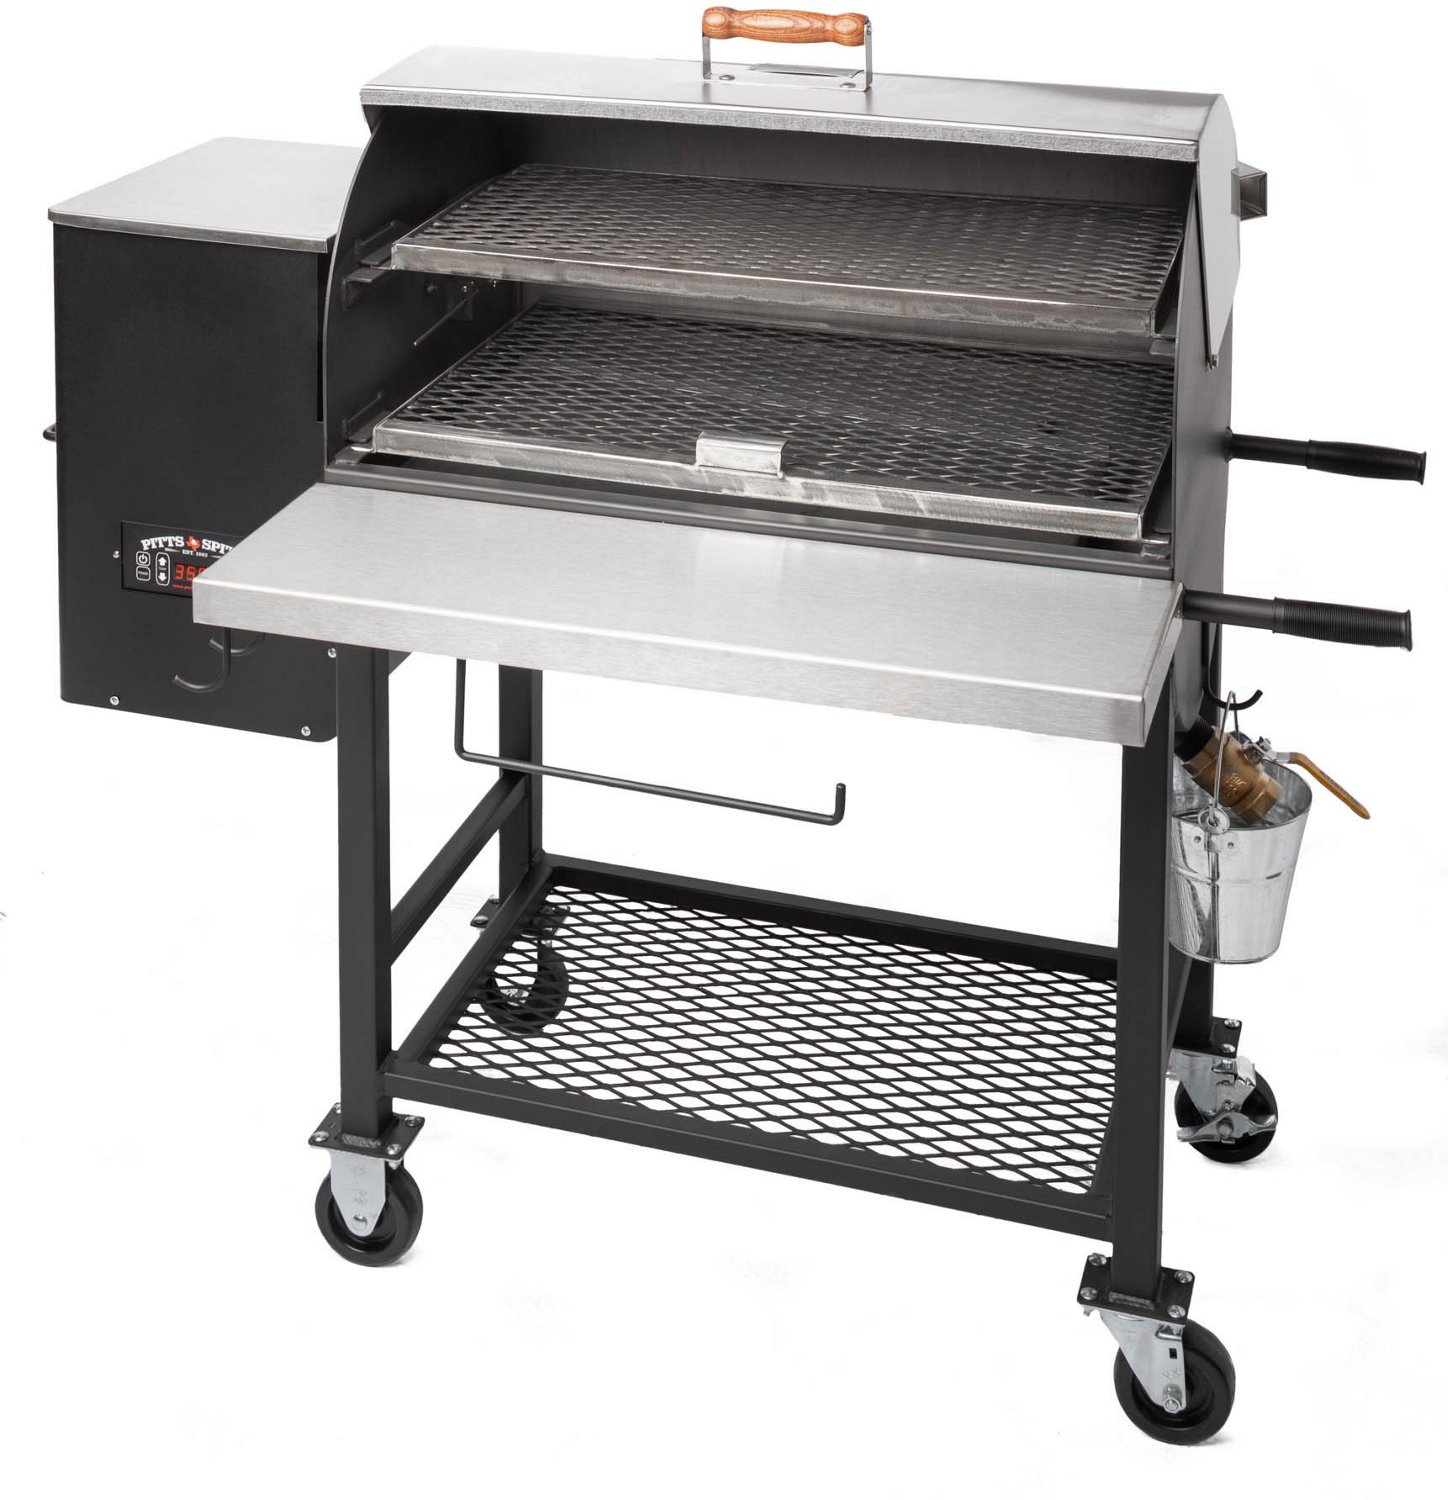 Pitts & Spitts Maverick 850 Pellet Grill                                                                                         - view number 3